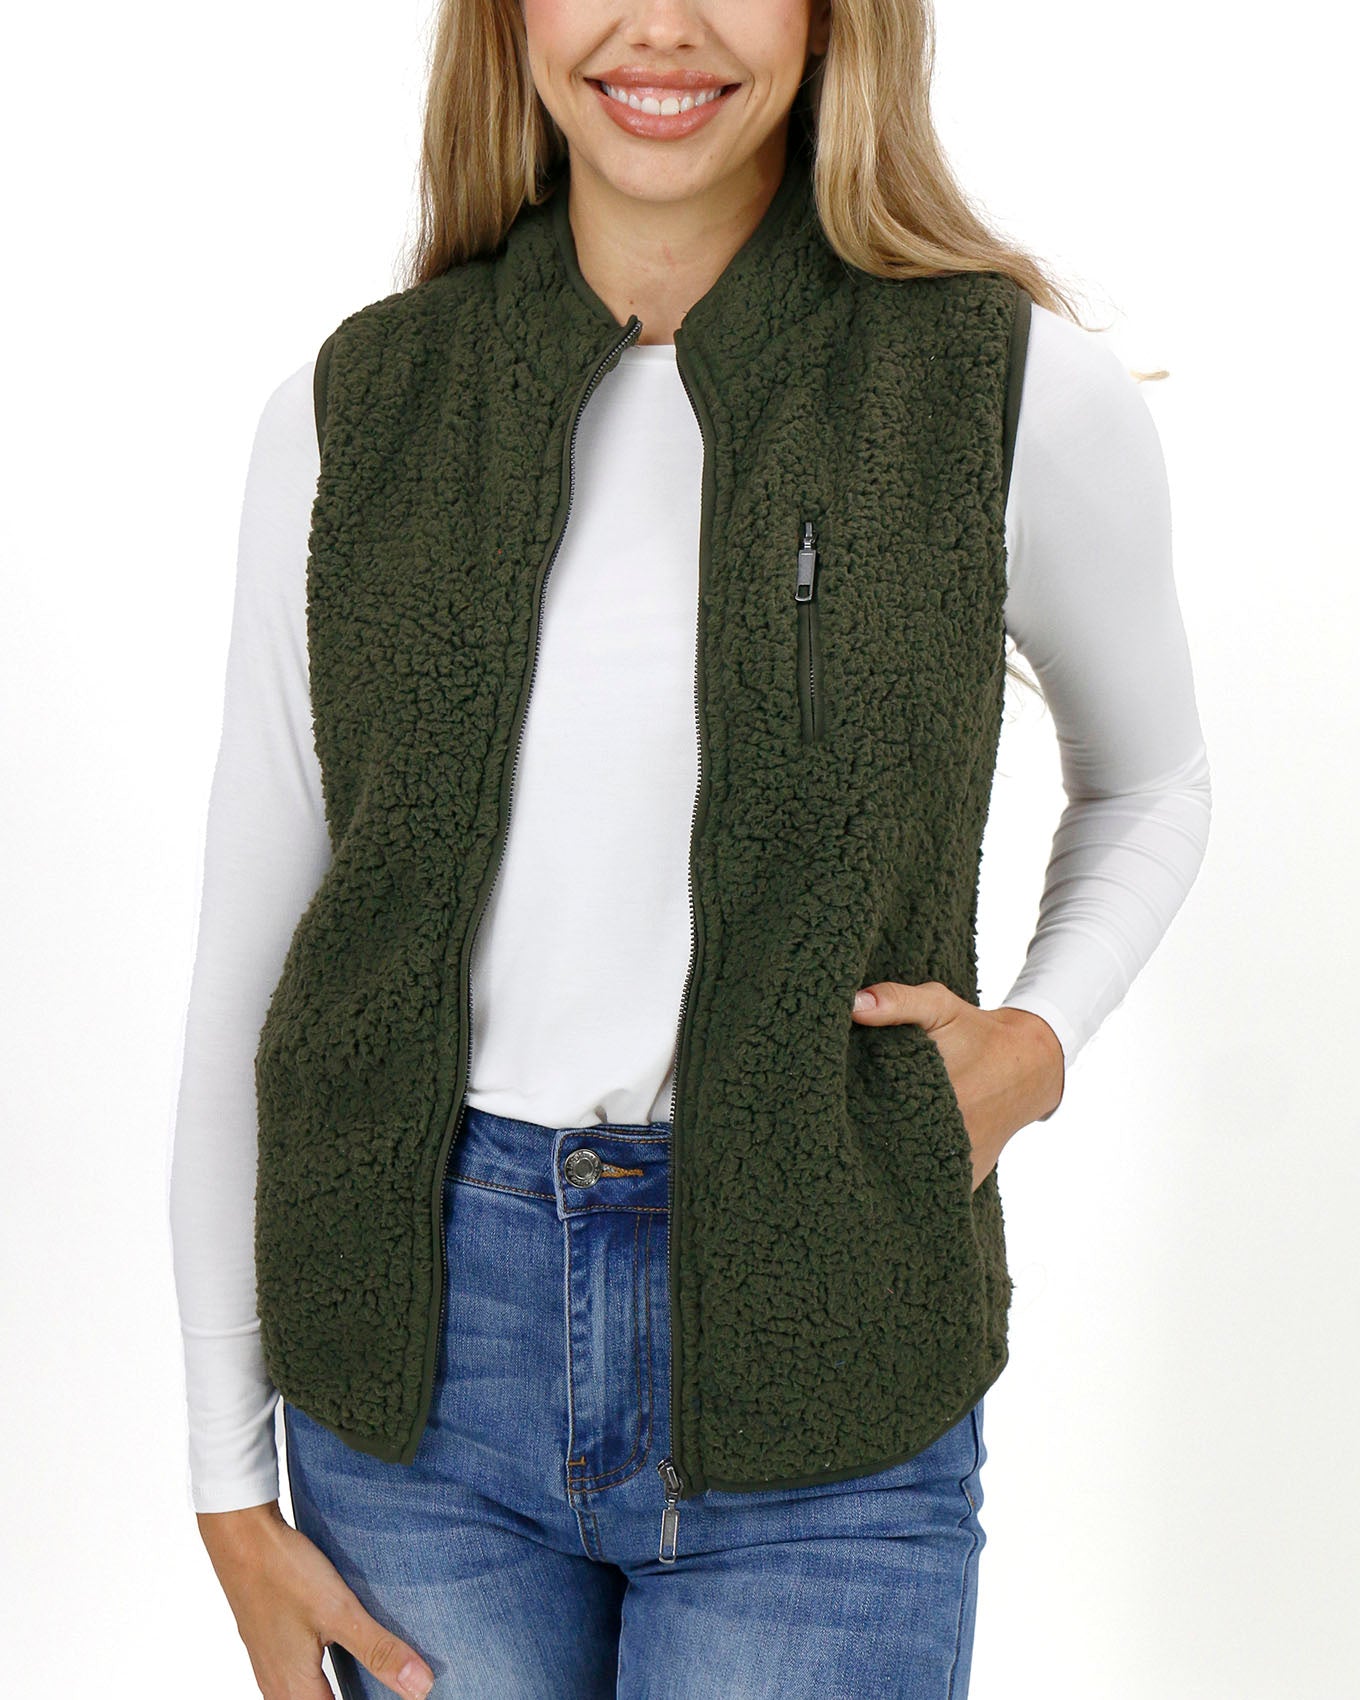 front view unzipped stock shot of olive sherpa vest